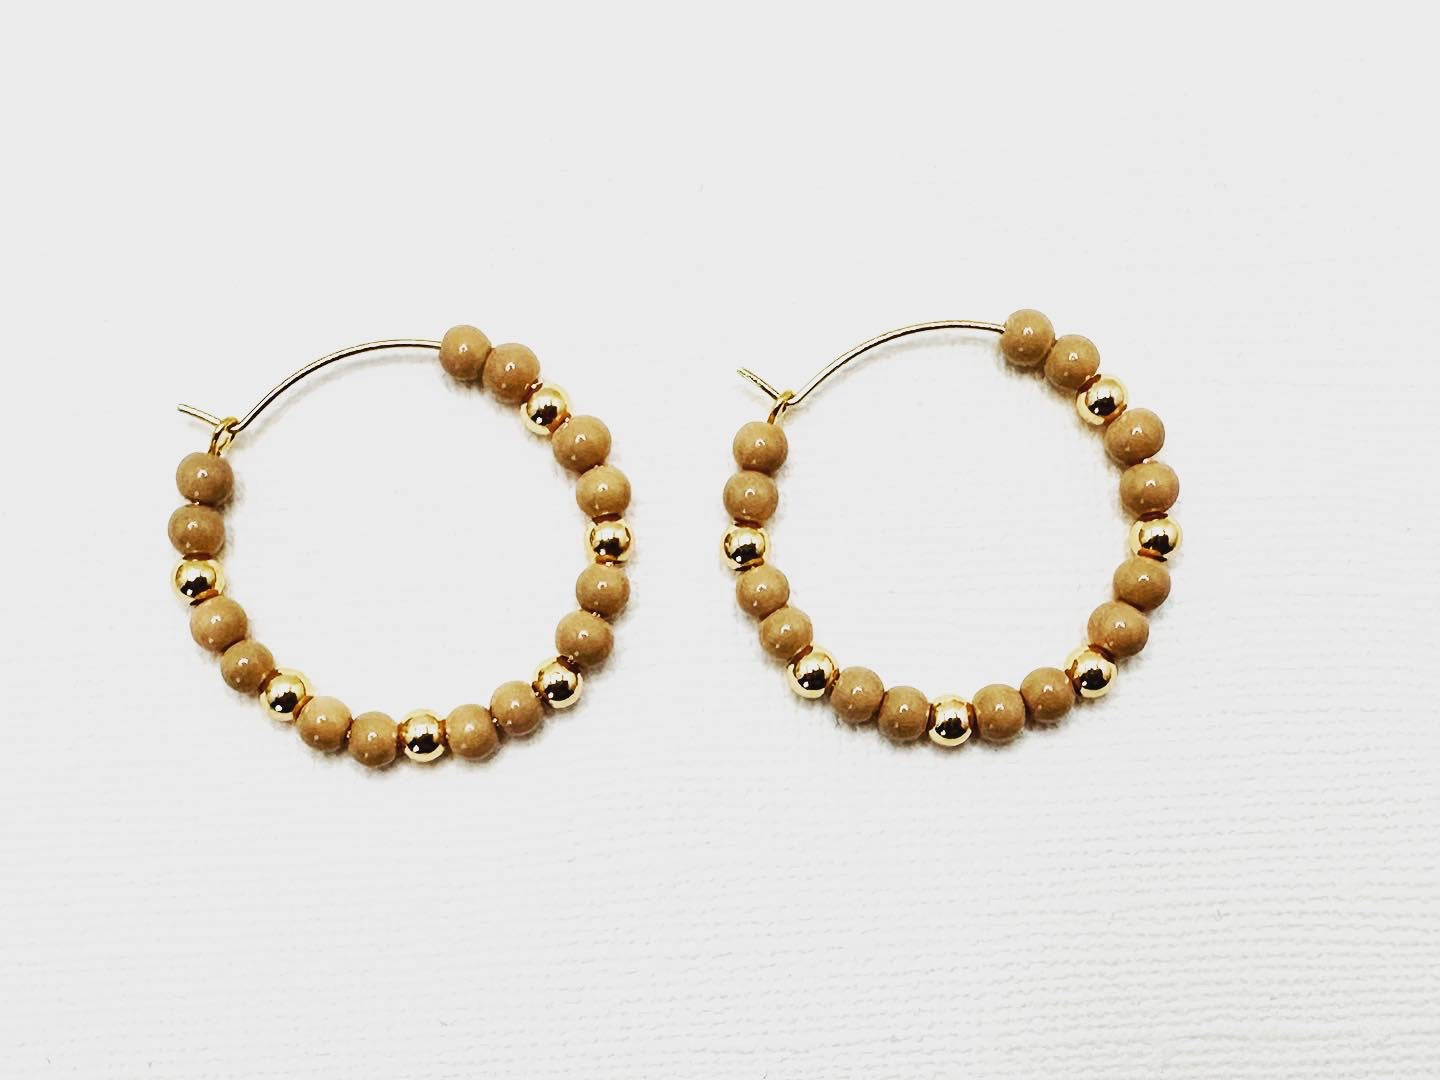 Small Tan and Gold Hoop Earrings